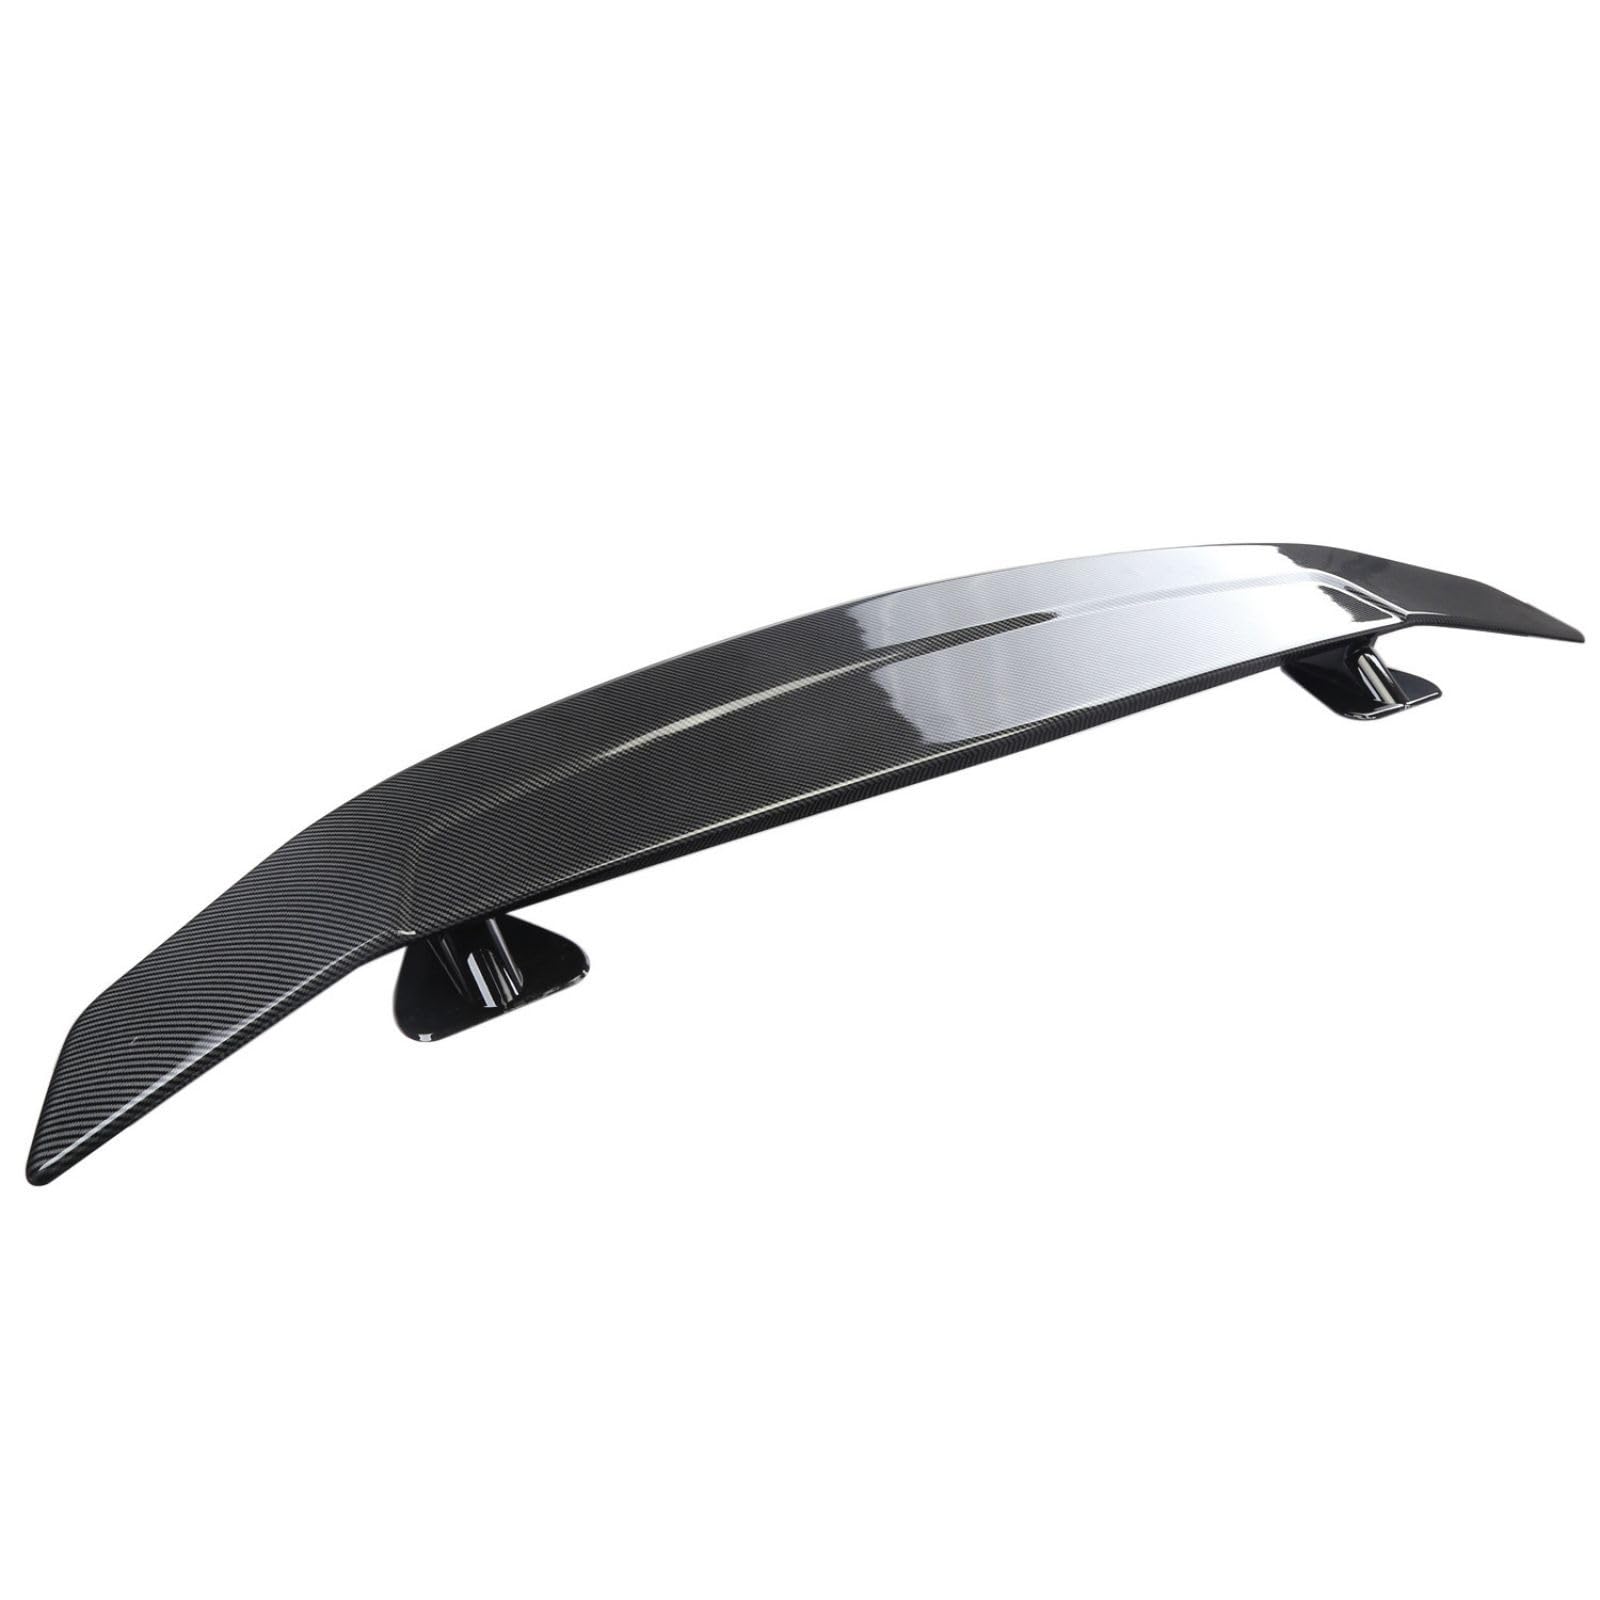 Car Rear Window Spoiler for Alpina B3 Cabrio (E46) 2000-2006, without Perforation Lid Spoiler Wings Installation Rear Wing Decoration,Carbon Fiber Color von EESWCSZZ3